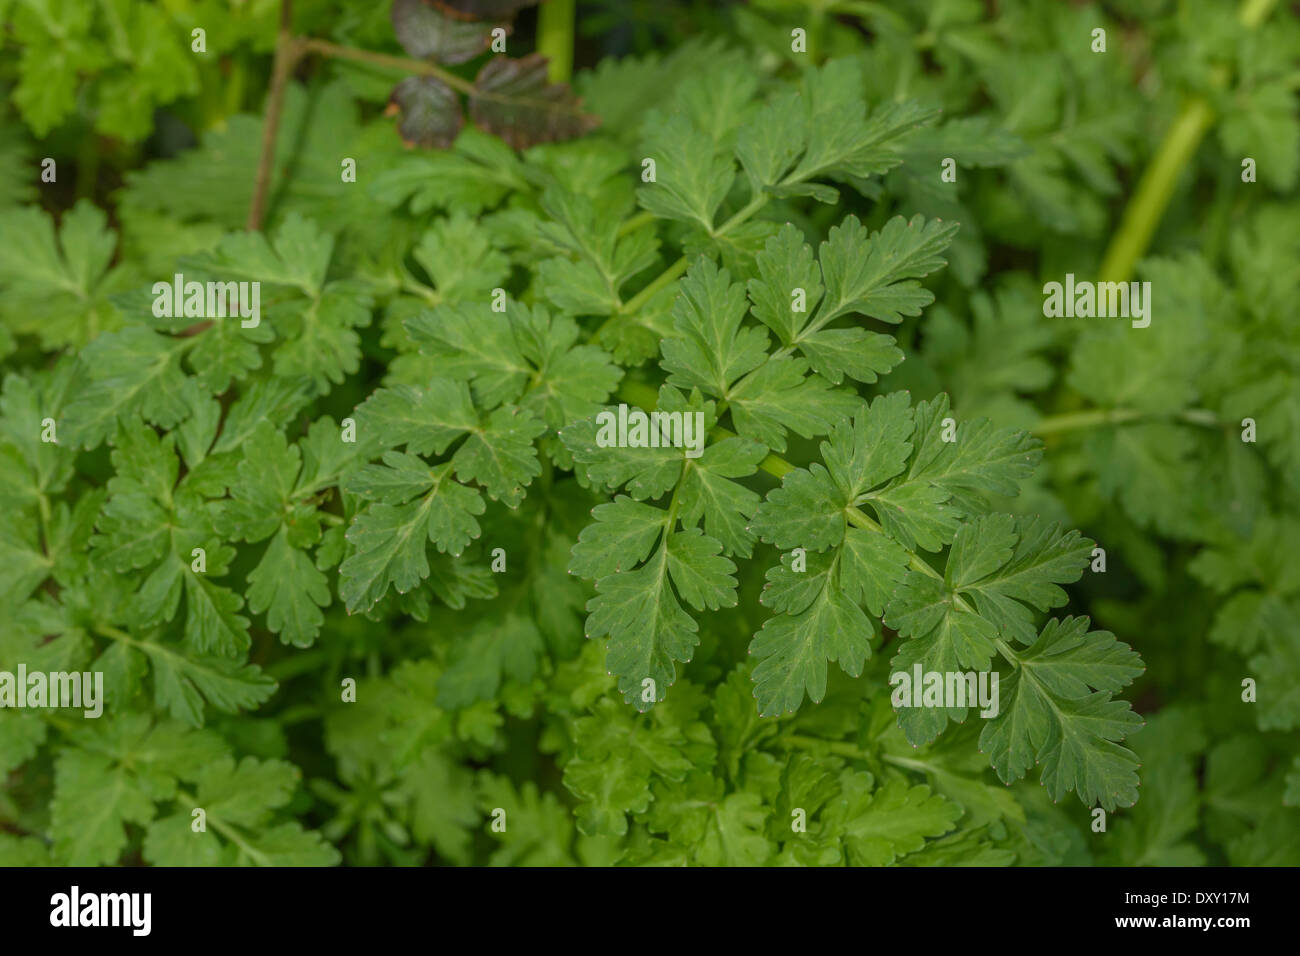 Hemlock Water Dropwort / Oenanthe crocata close detail of leaflets. One of the UK's most poisonous plants. Stock Photo